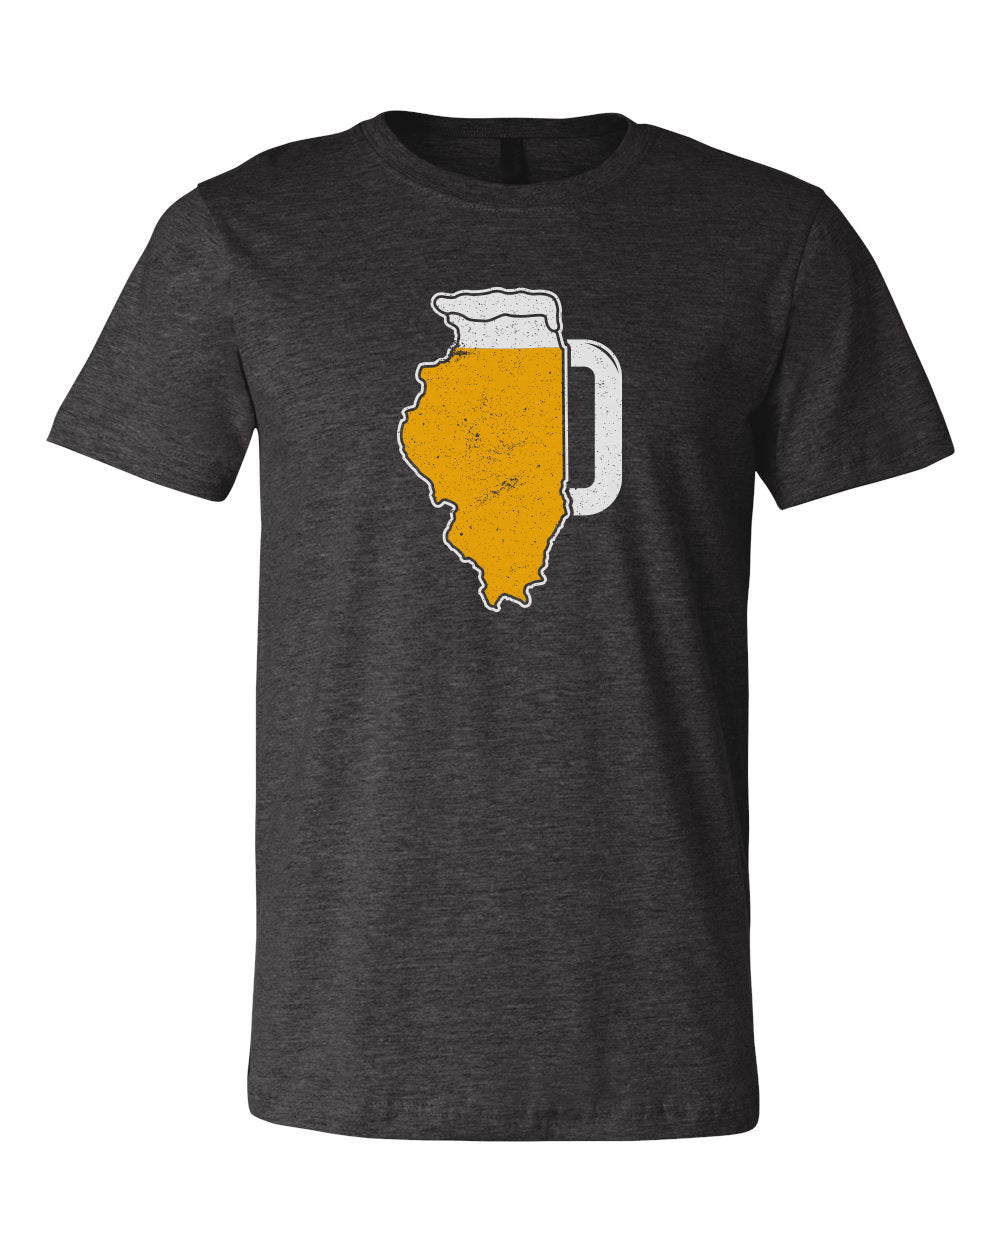 Dark gray shirt with the state of Illinois shaped beer mug on it